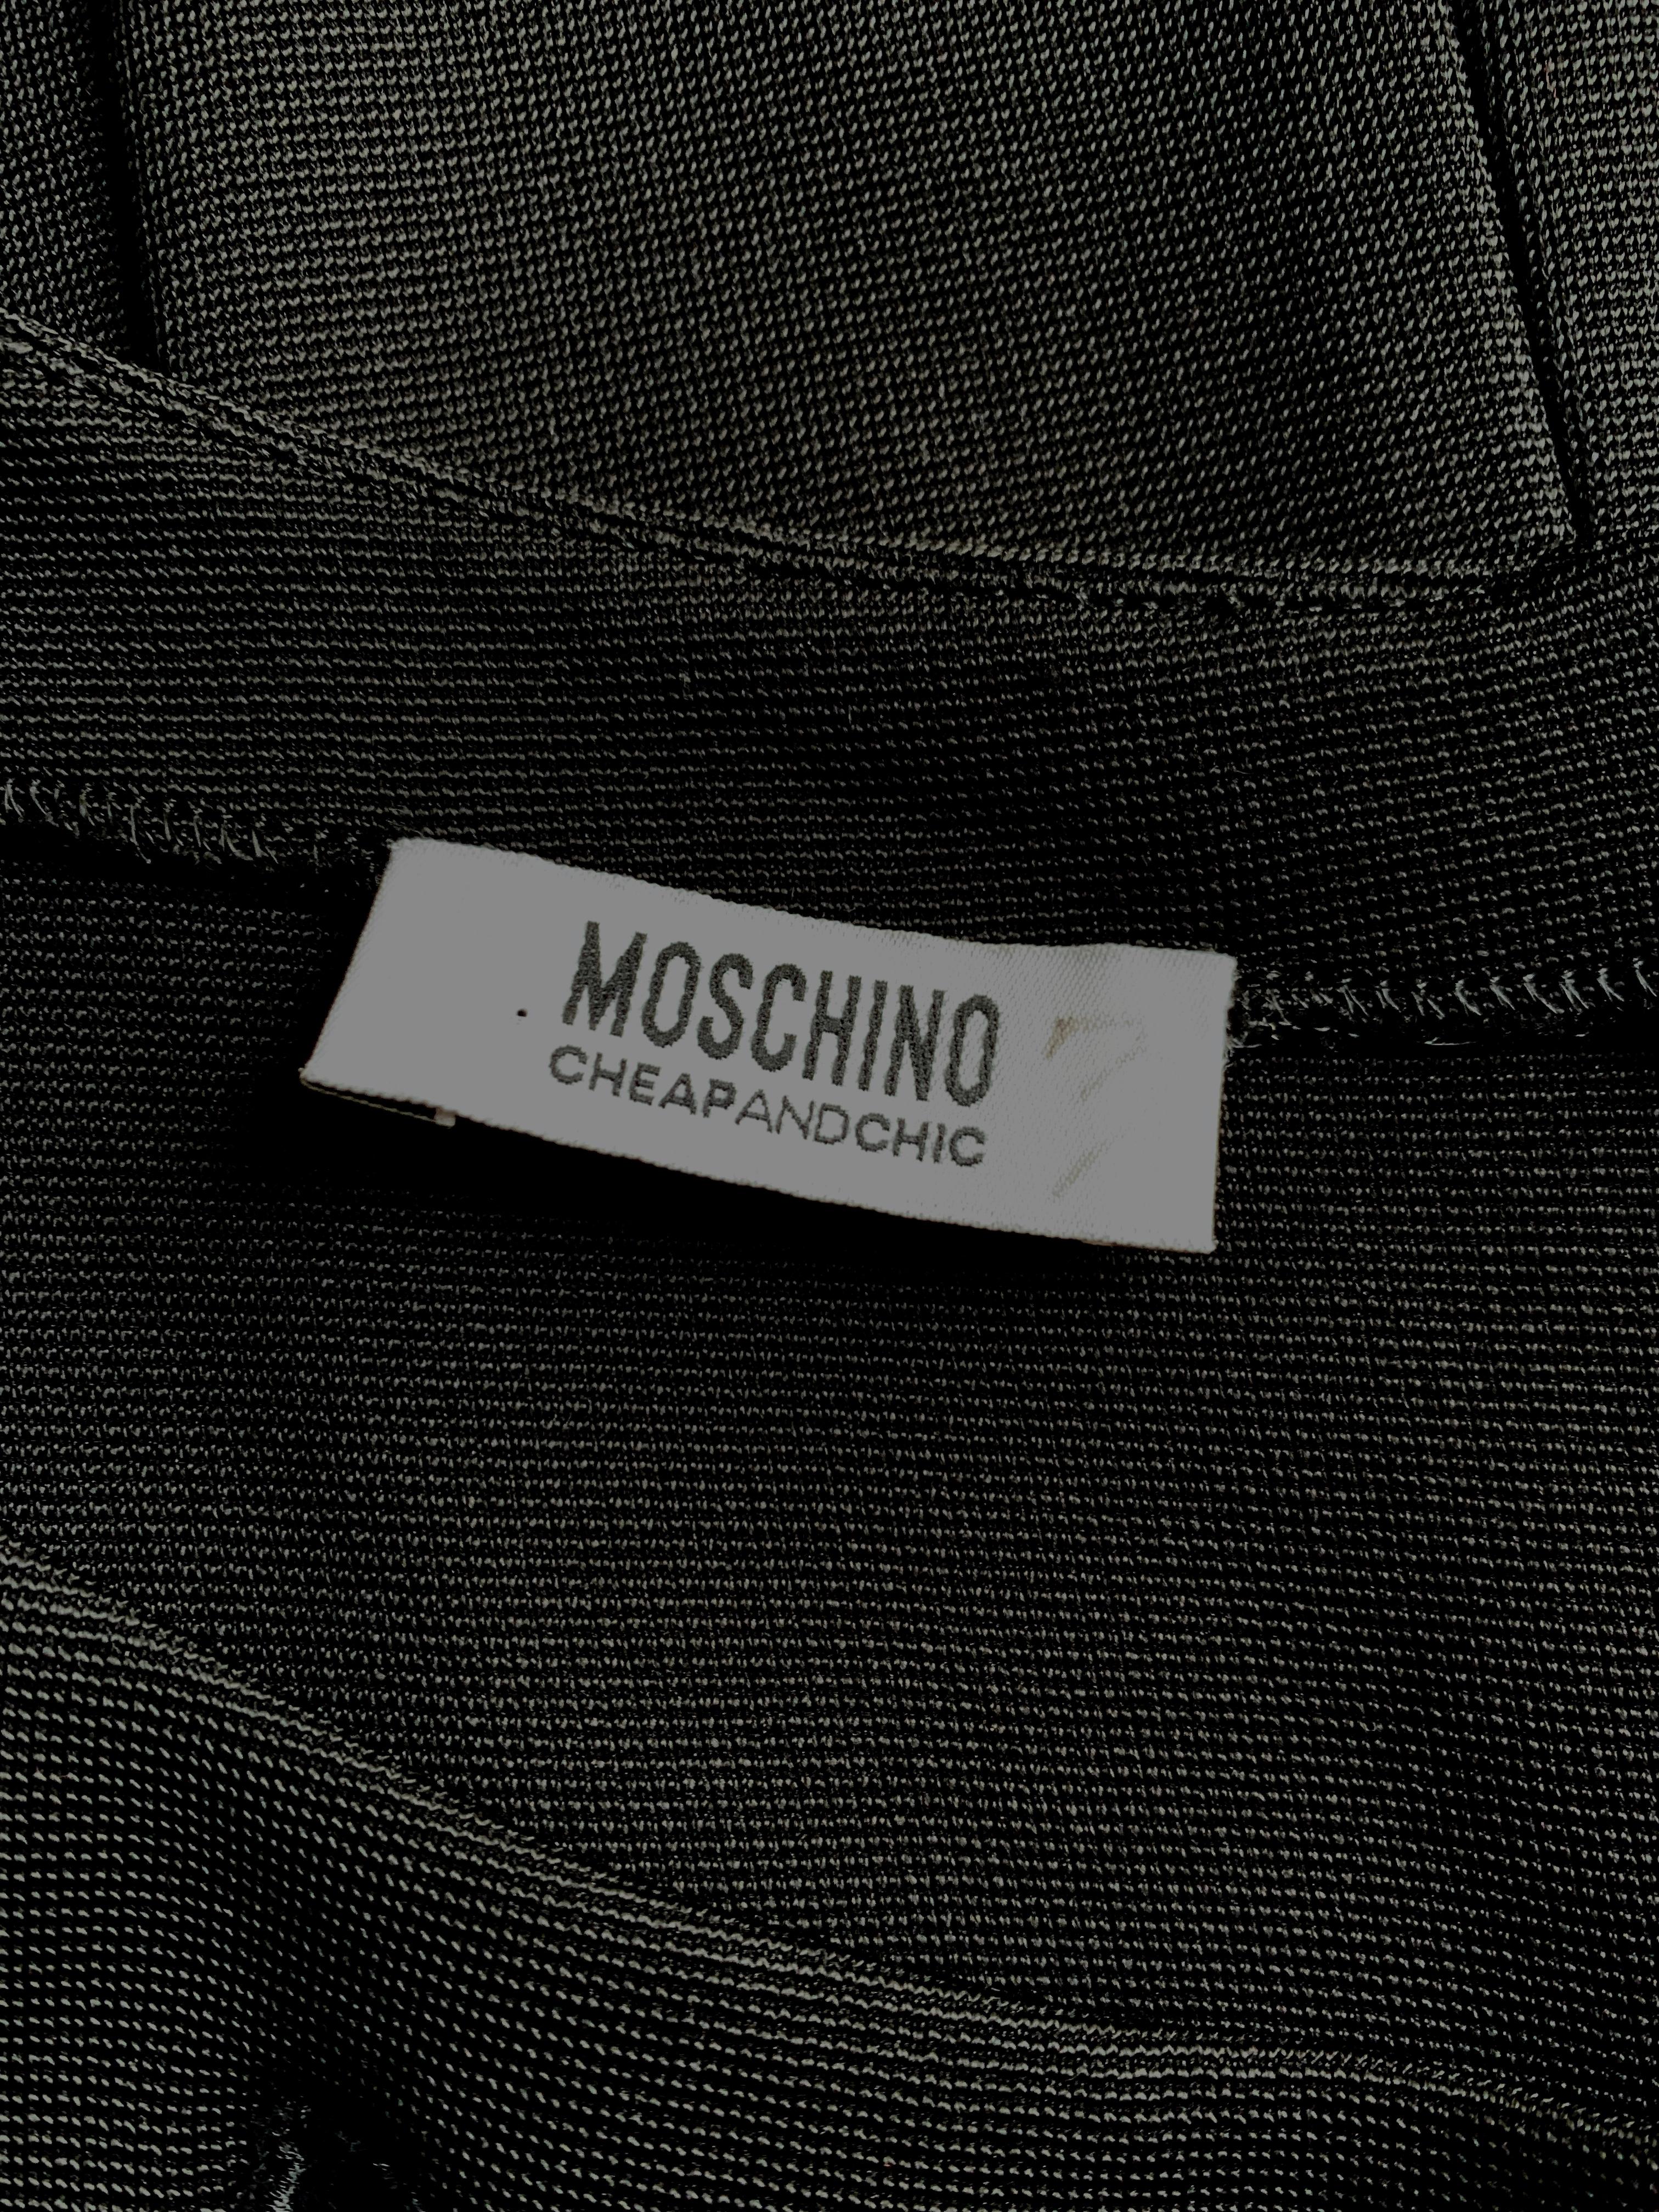 Moschino Cheap and Chic Black Mesh Bow Knit Dress In Good Condition For Sale In San Francisco, CA